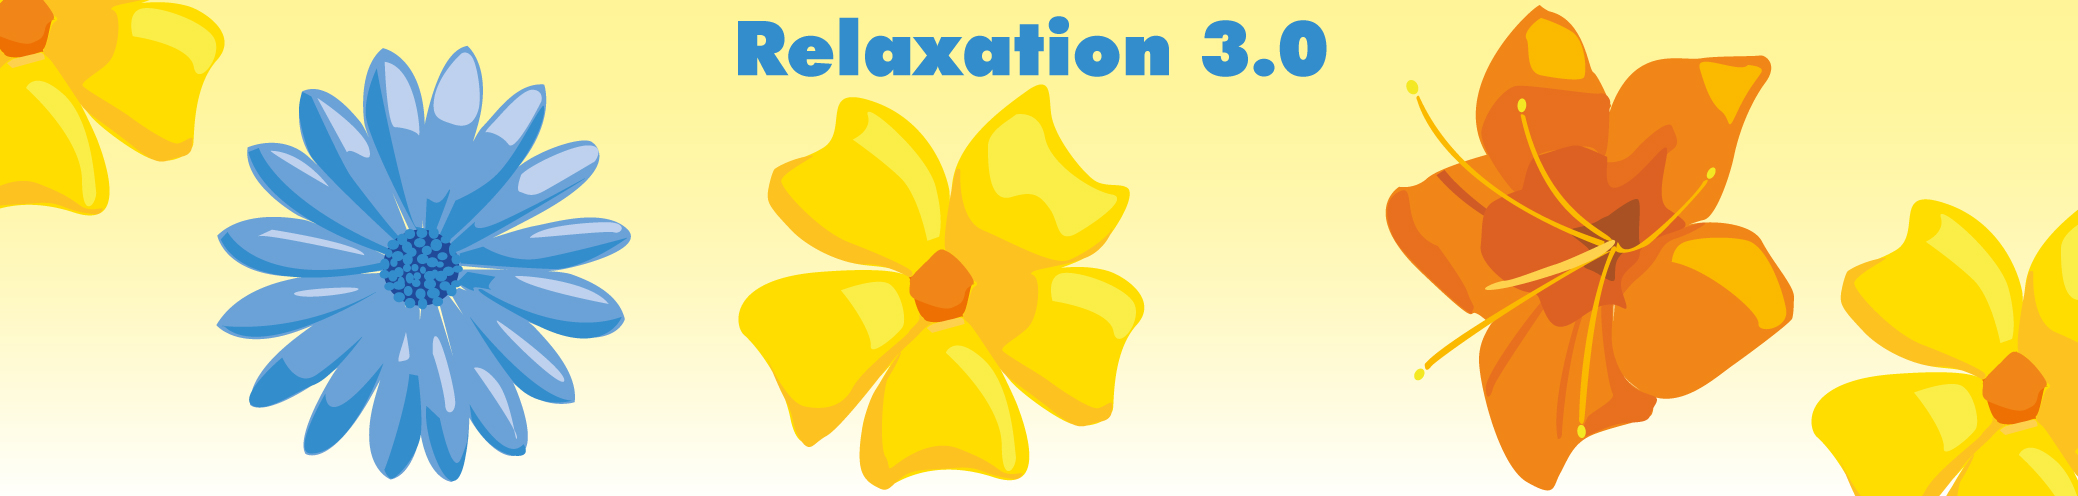 Relaxation 3.0 flowers